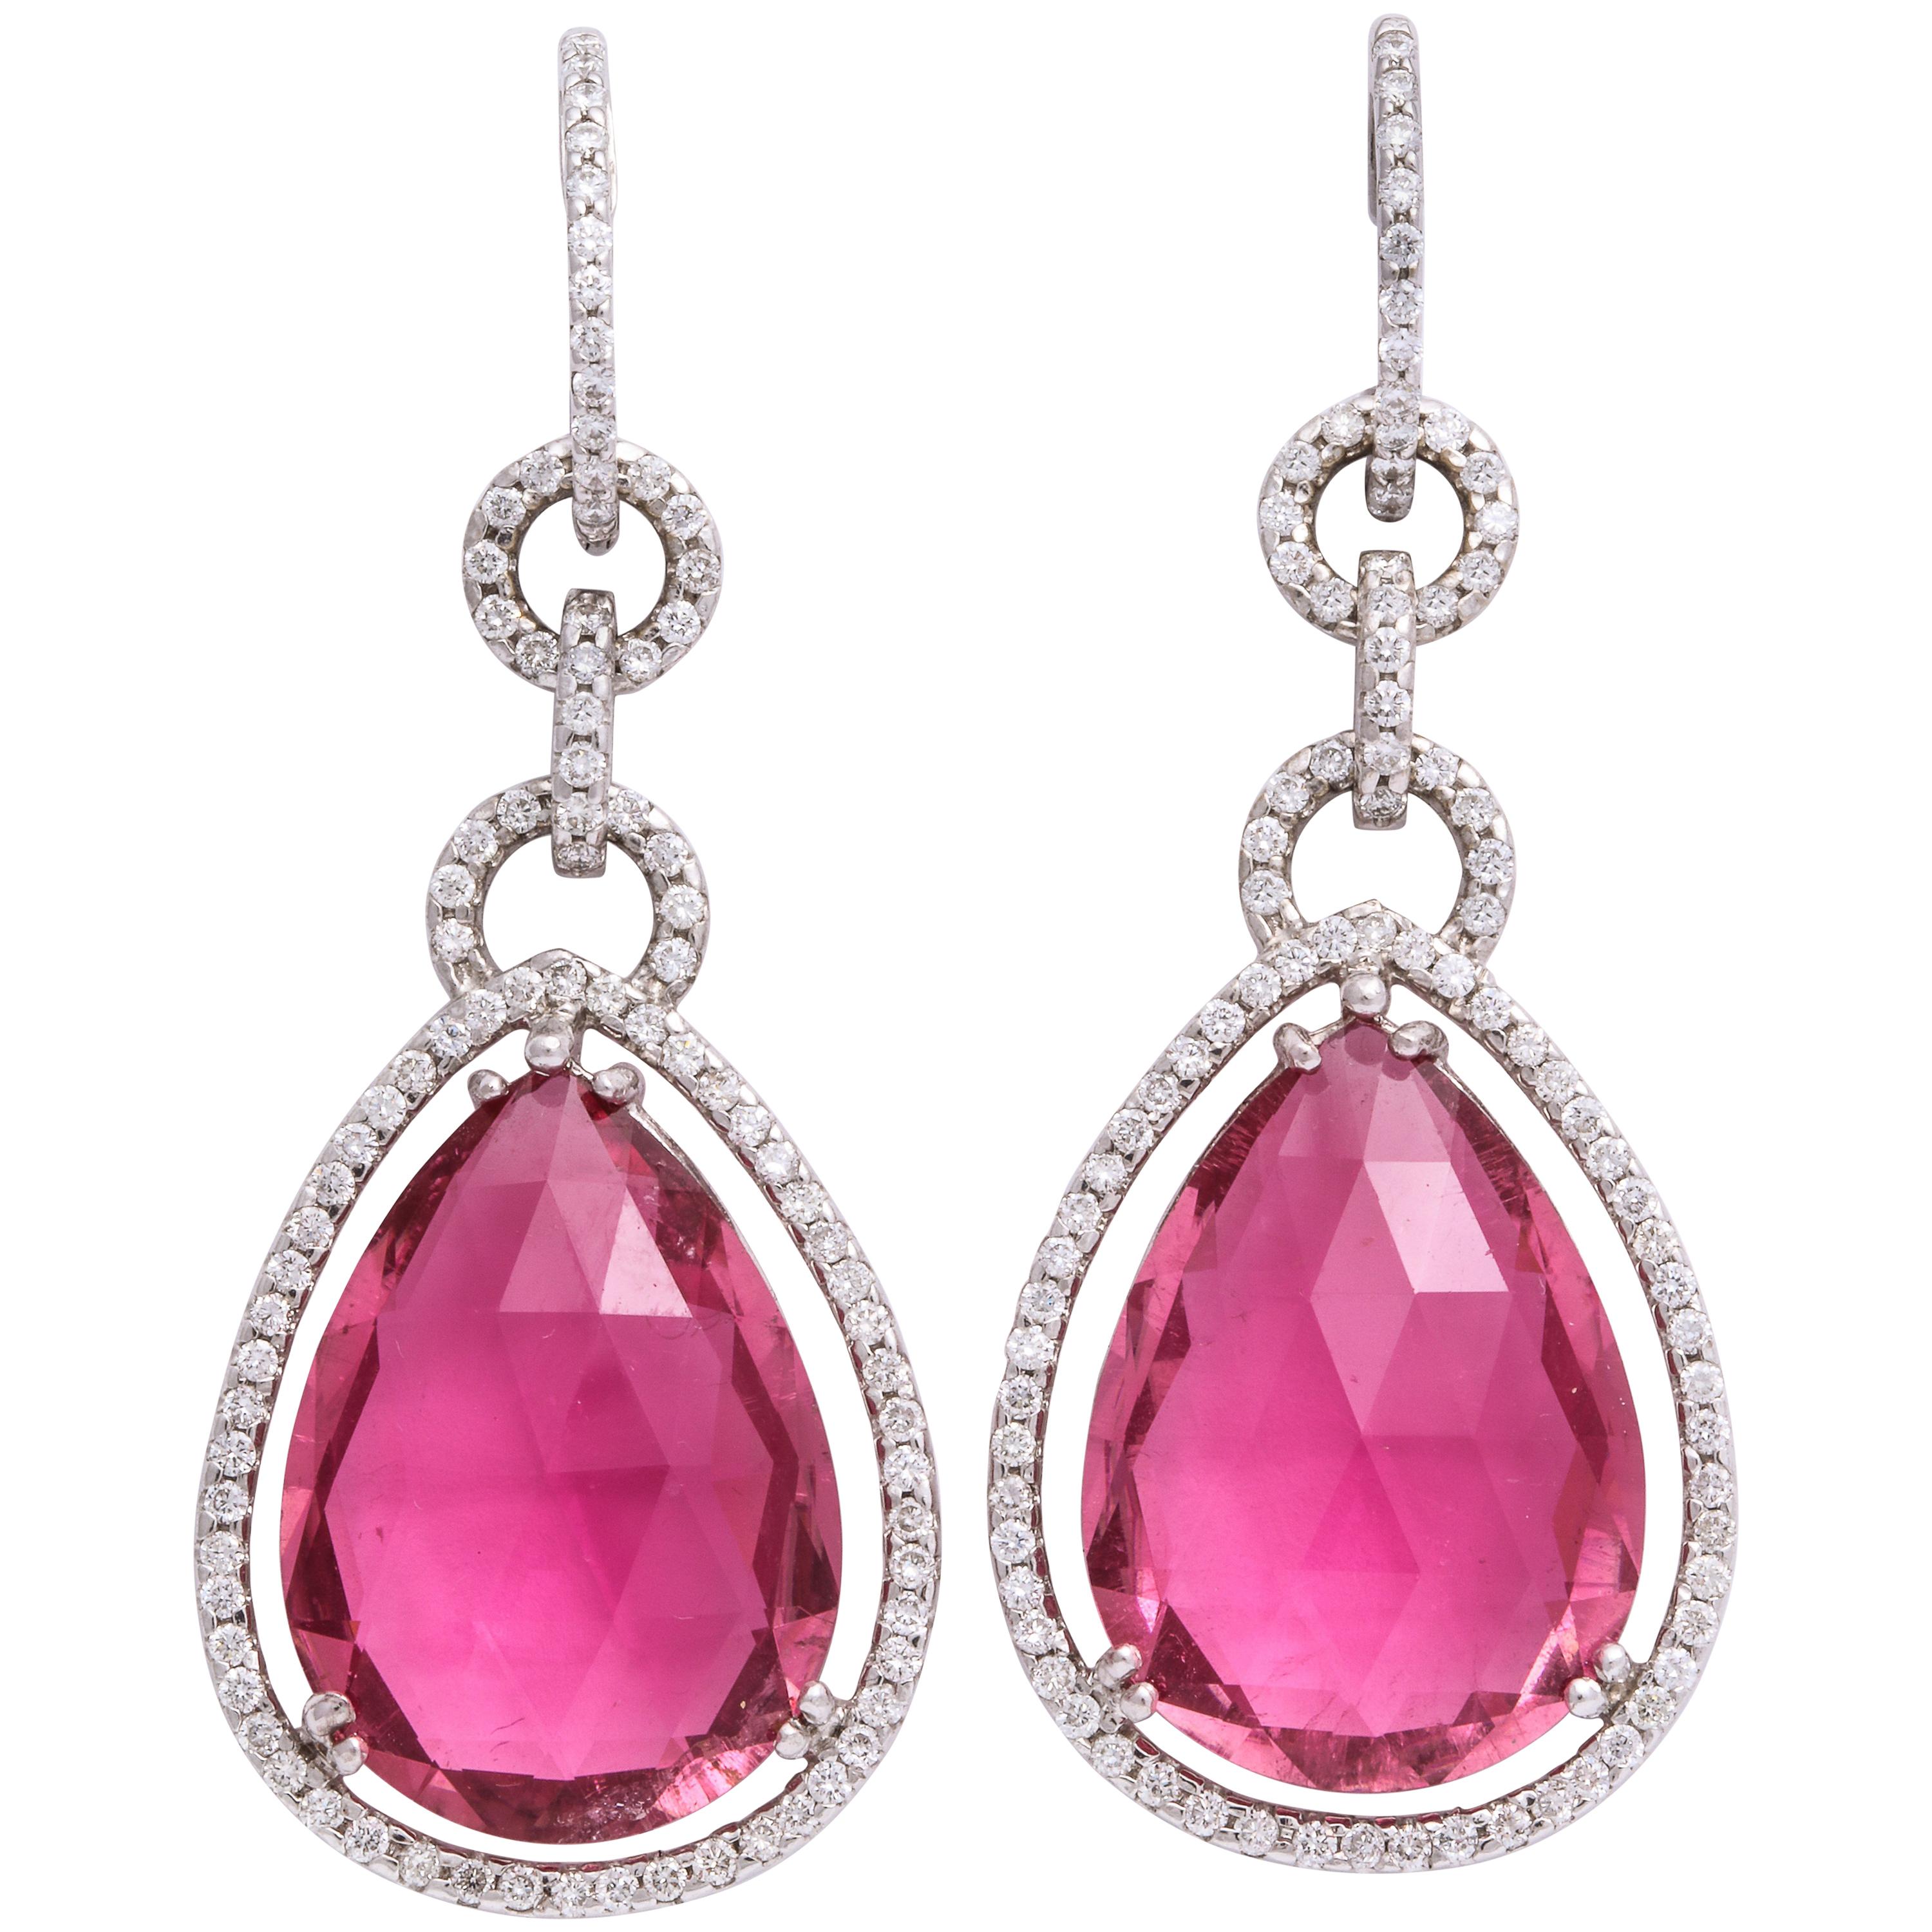 White Gold, Pear Shaped Pink Tourmaline and Diamond Pendant Earrings For Sale